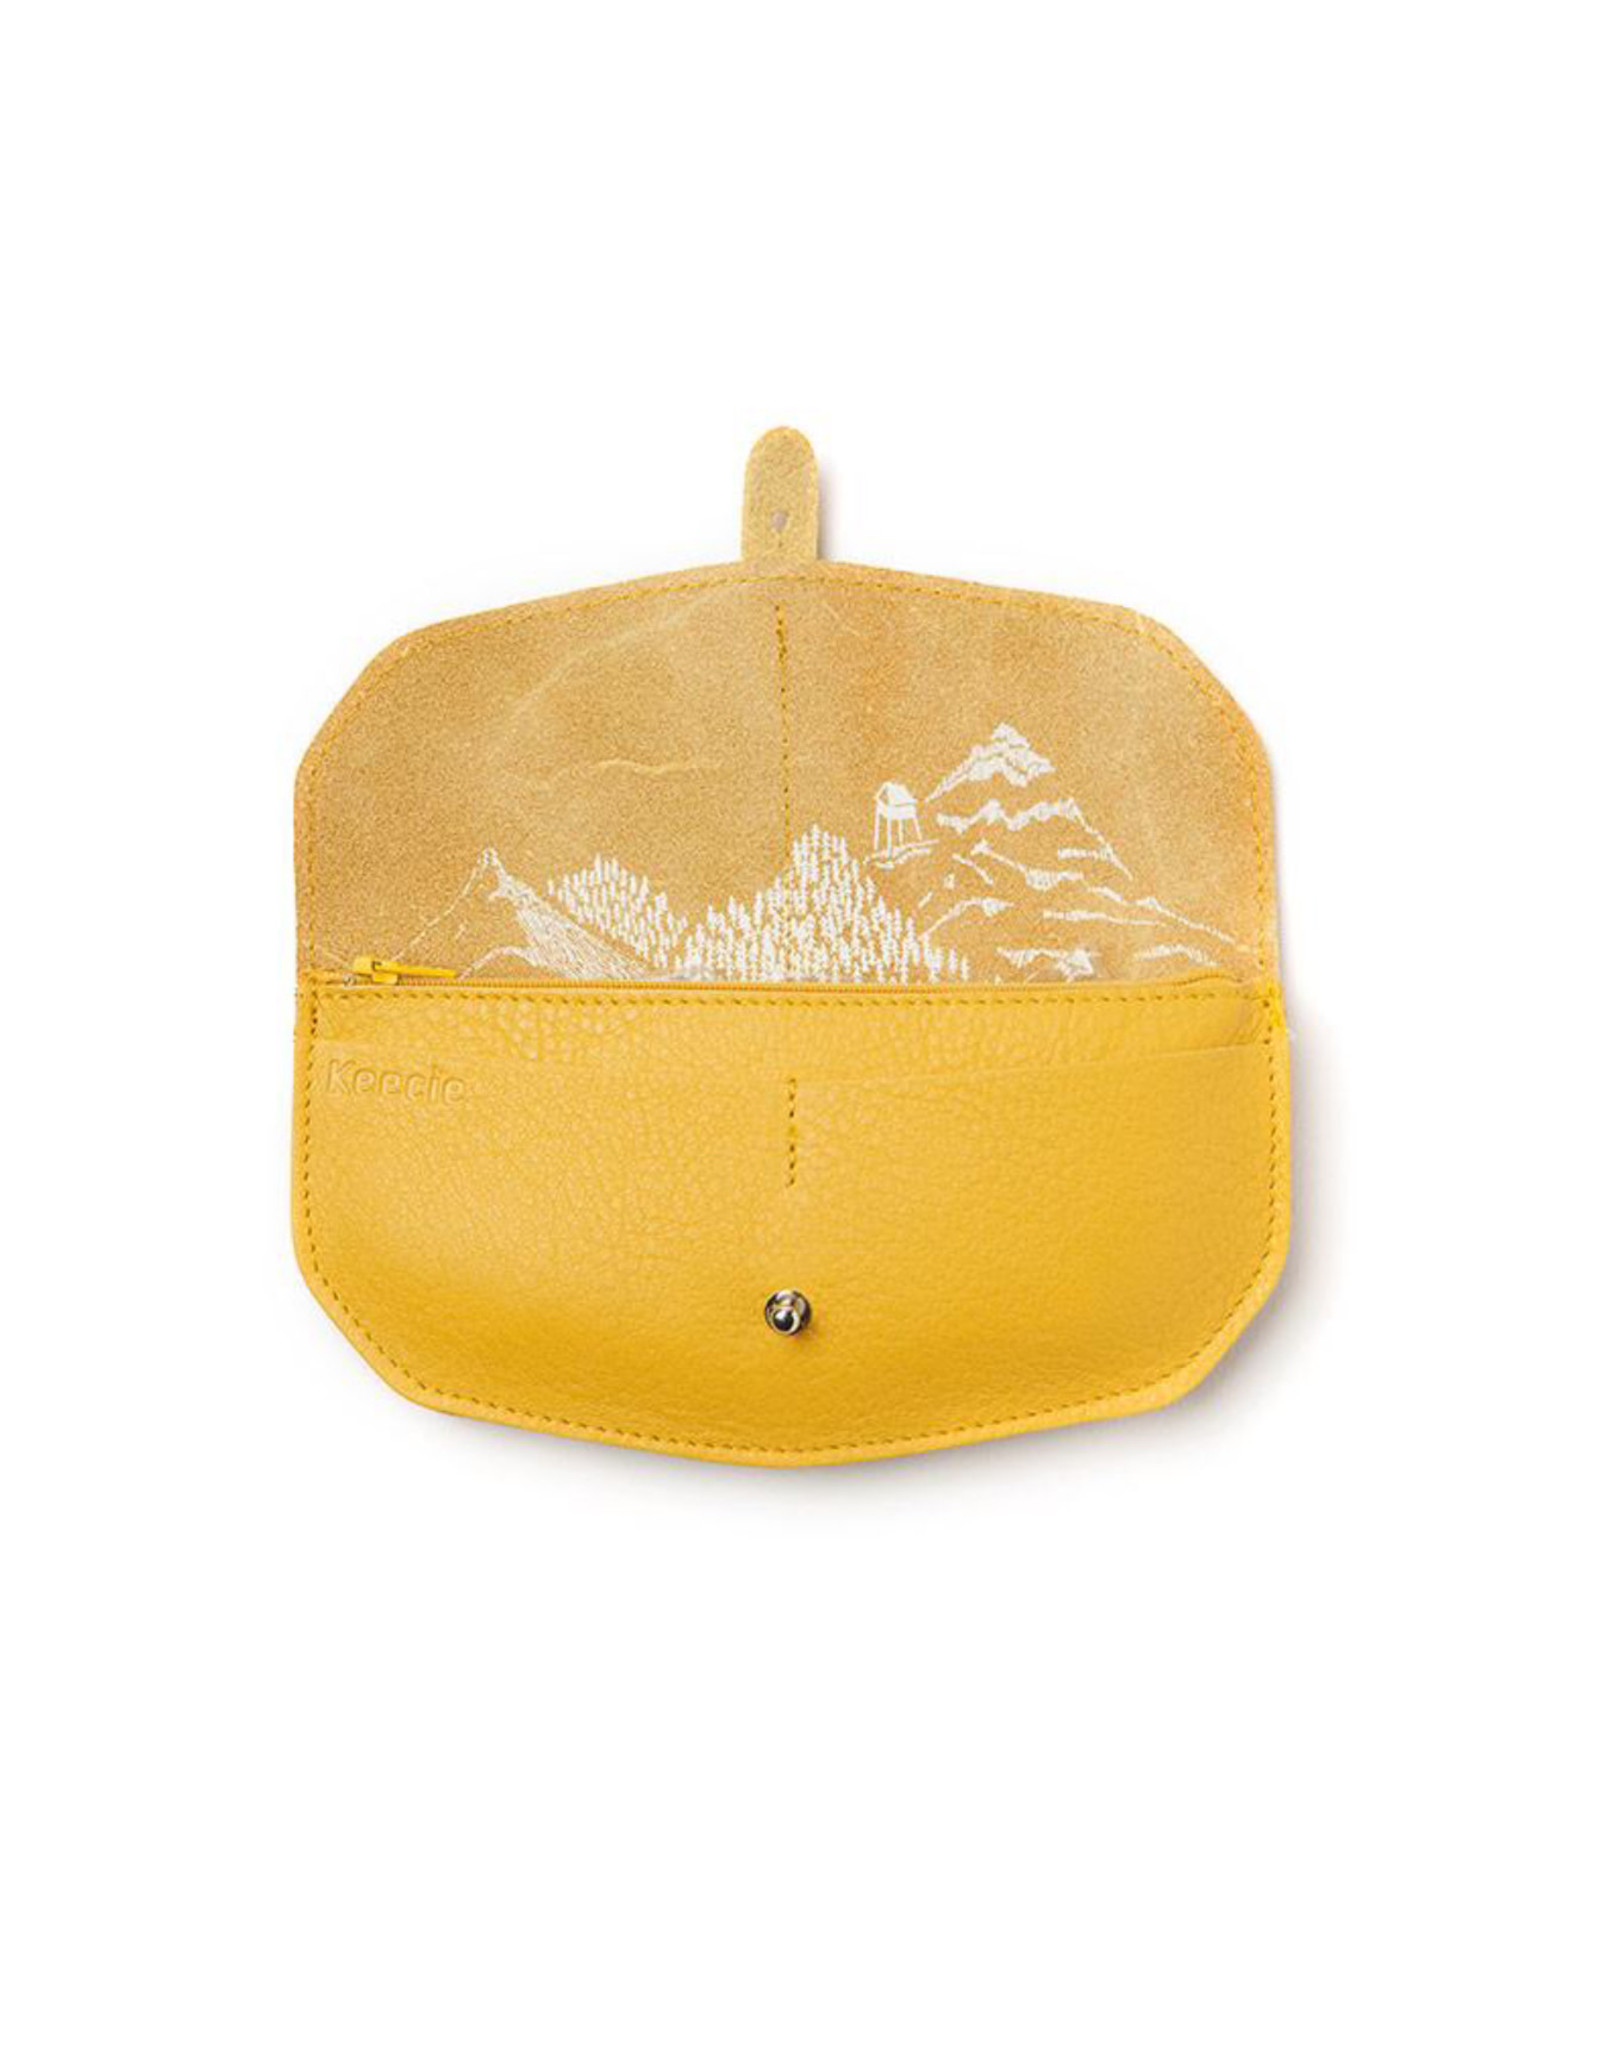 Keecie Move Mountains Wallet, Yellow